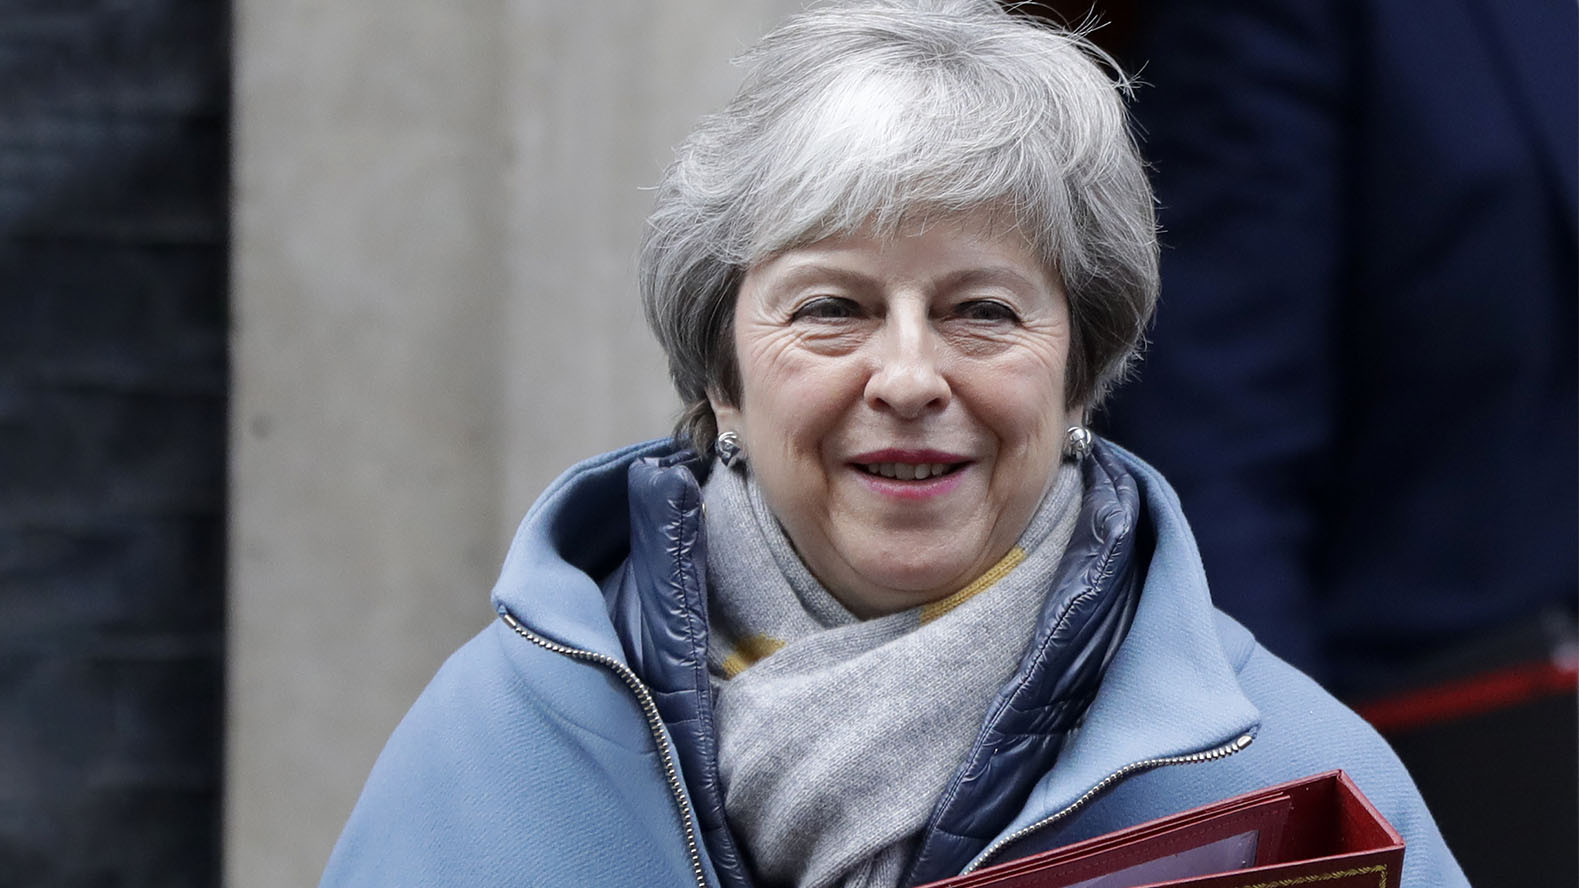 Britain's Prime Minister Theresa May leaves Downing Street to attend parliament in London, Monday, Jan. 21, 2019. Prime Minister Theresa May is set to unveil her new plan to break Britain's Brexit deadlock — and it's expected to look a lot like the old plan decisively rejected by Parliament last week. (AP Photo/Kirsty Wigglesworth)